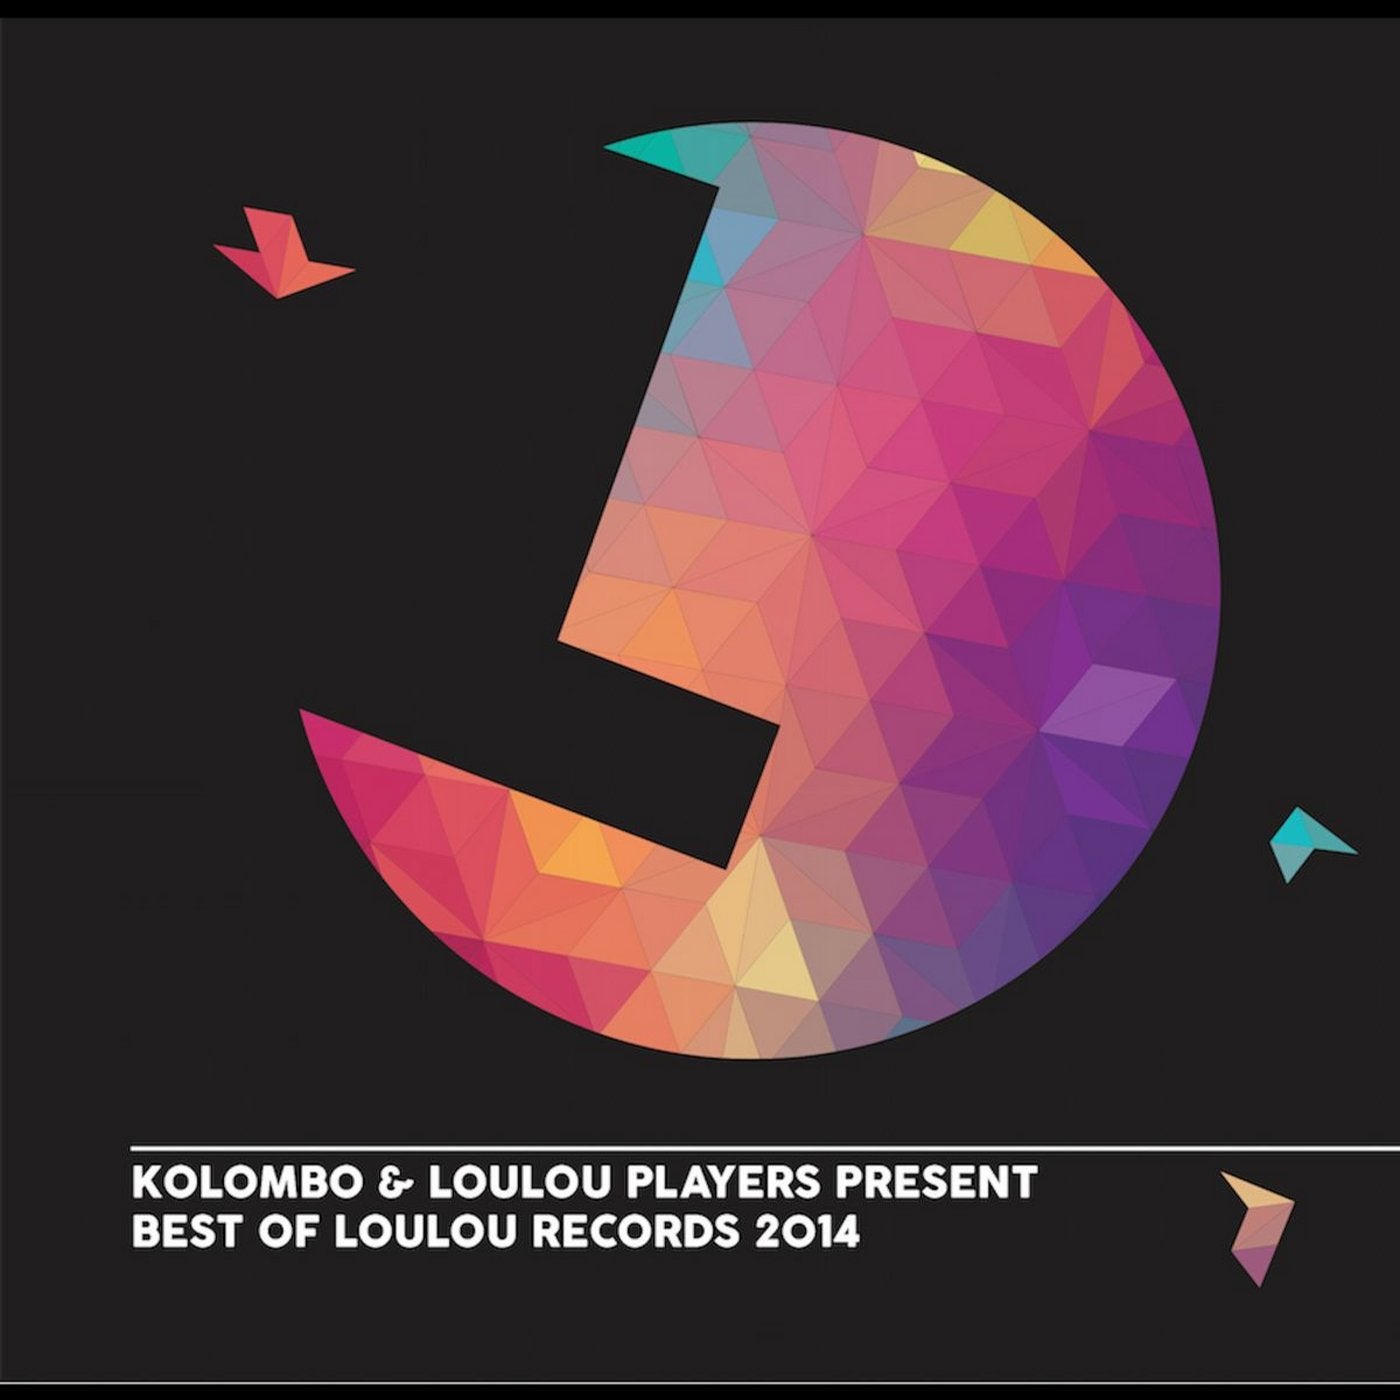 Best of Loulou Records 2014